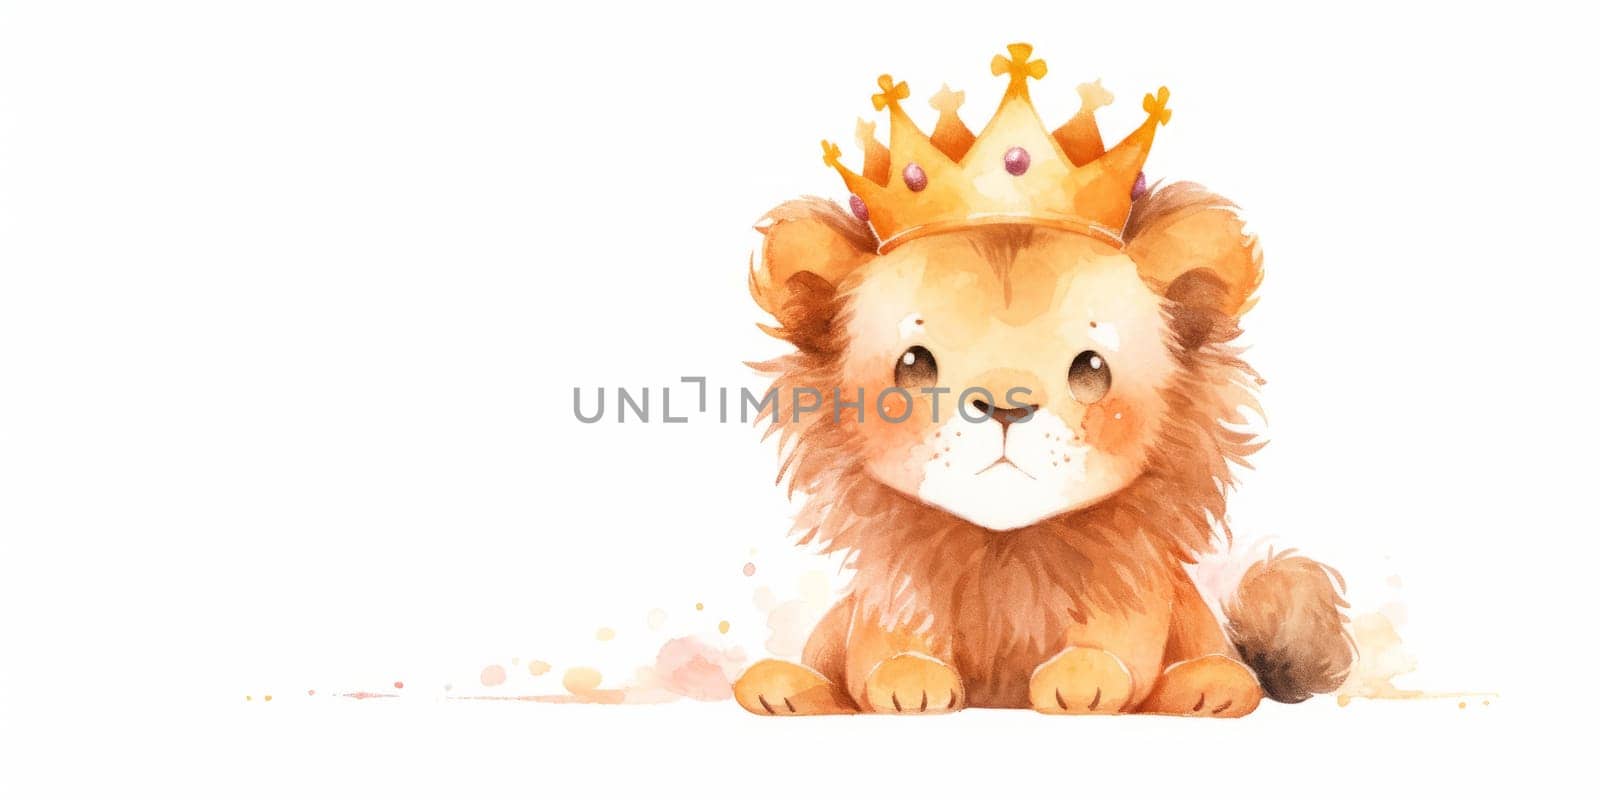 Cute kawaii baby lion in crown hand drawn watercolor illustration